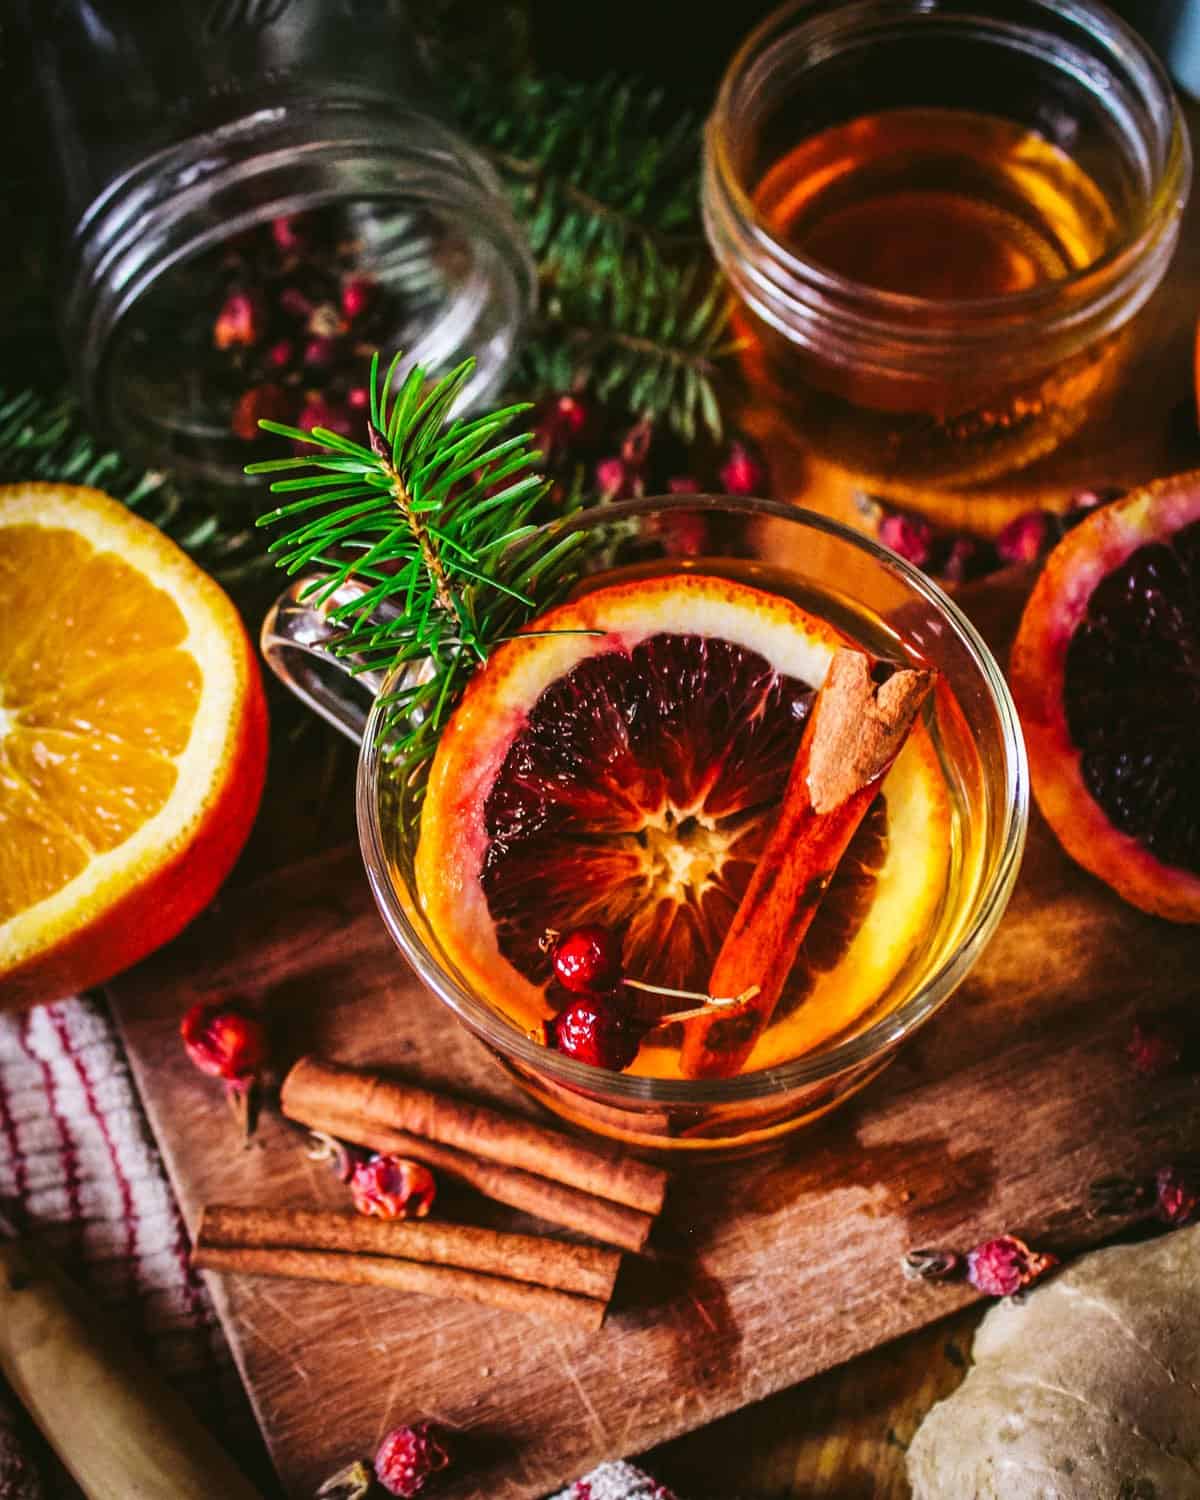 a conifer hot toddy with an orange slice and cinnamon stick garnish